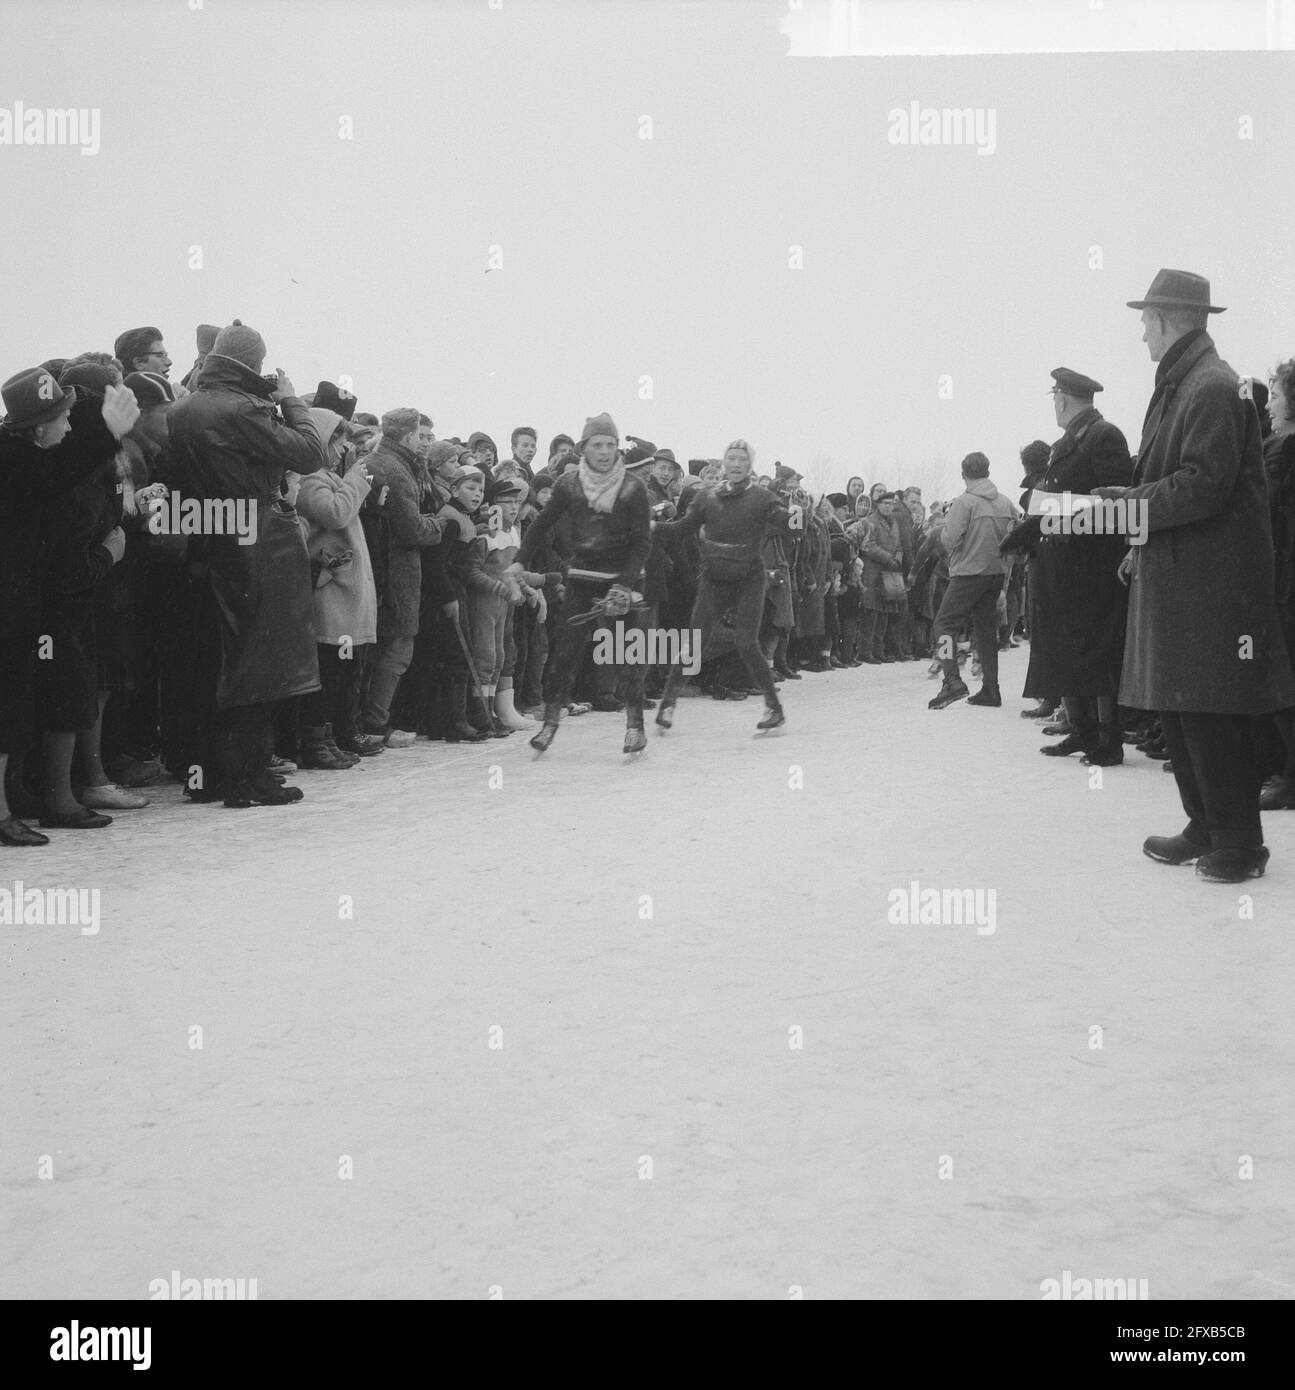 Elfstedentocht 1963, January 18, 1963, skating, sports, The Netherlands, 20th century press agency photo, news to remember, documentary, historic photography 1945-1990, visual stories, human history of the Twentieth Century, capturing moments in time Stock Photo